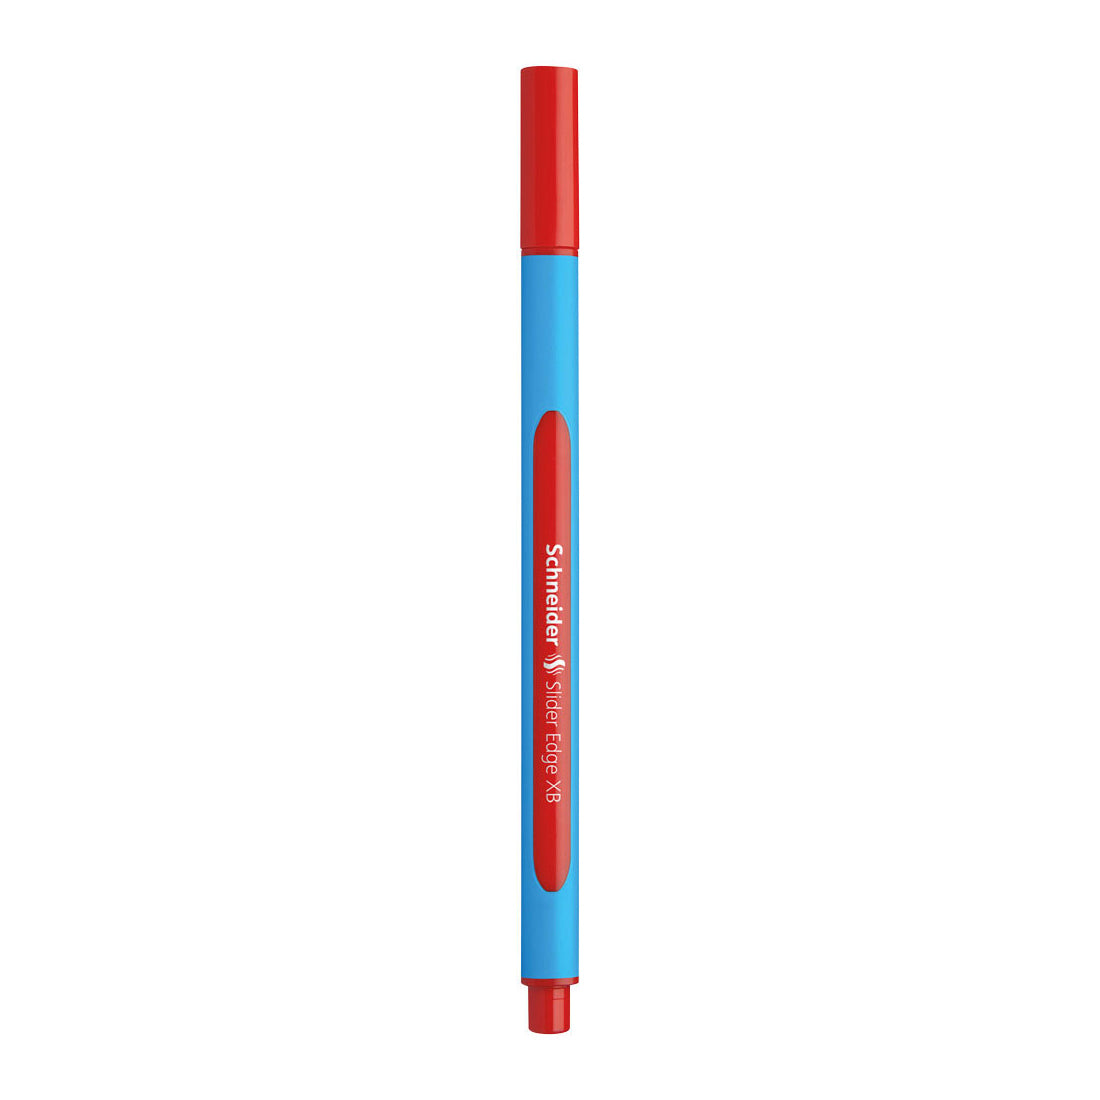 Edge Ballpoint Pen XB, Box of 10#ink-color_red